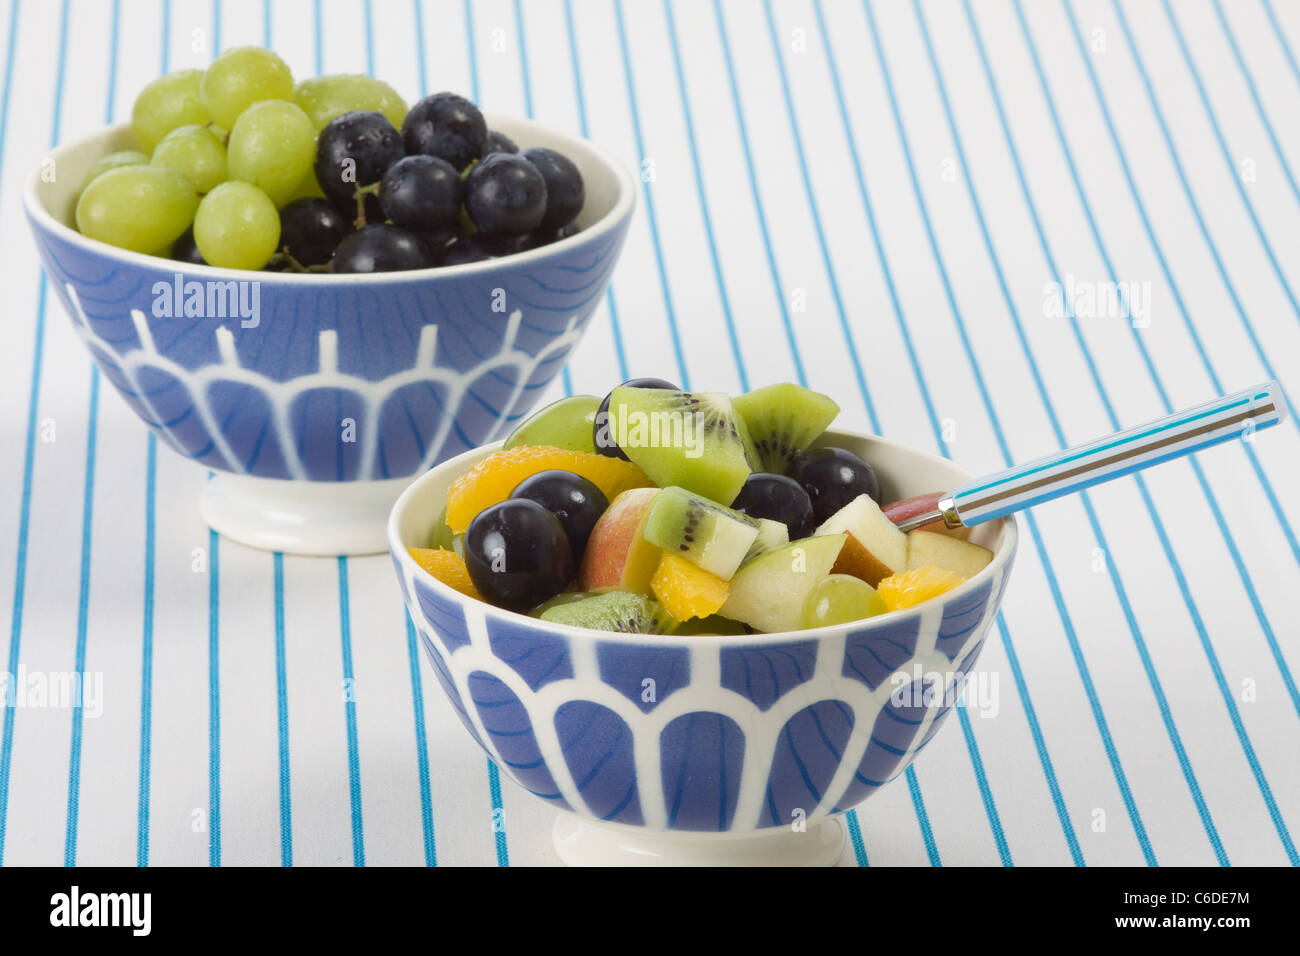 Fruit salad with different fruits Stock Photo